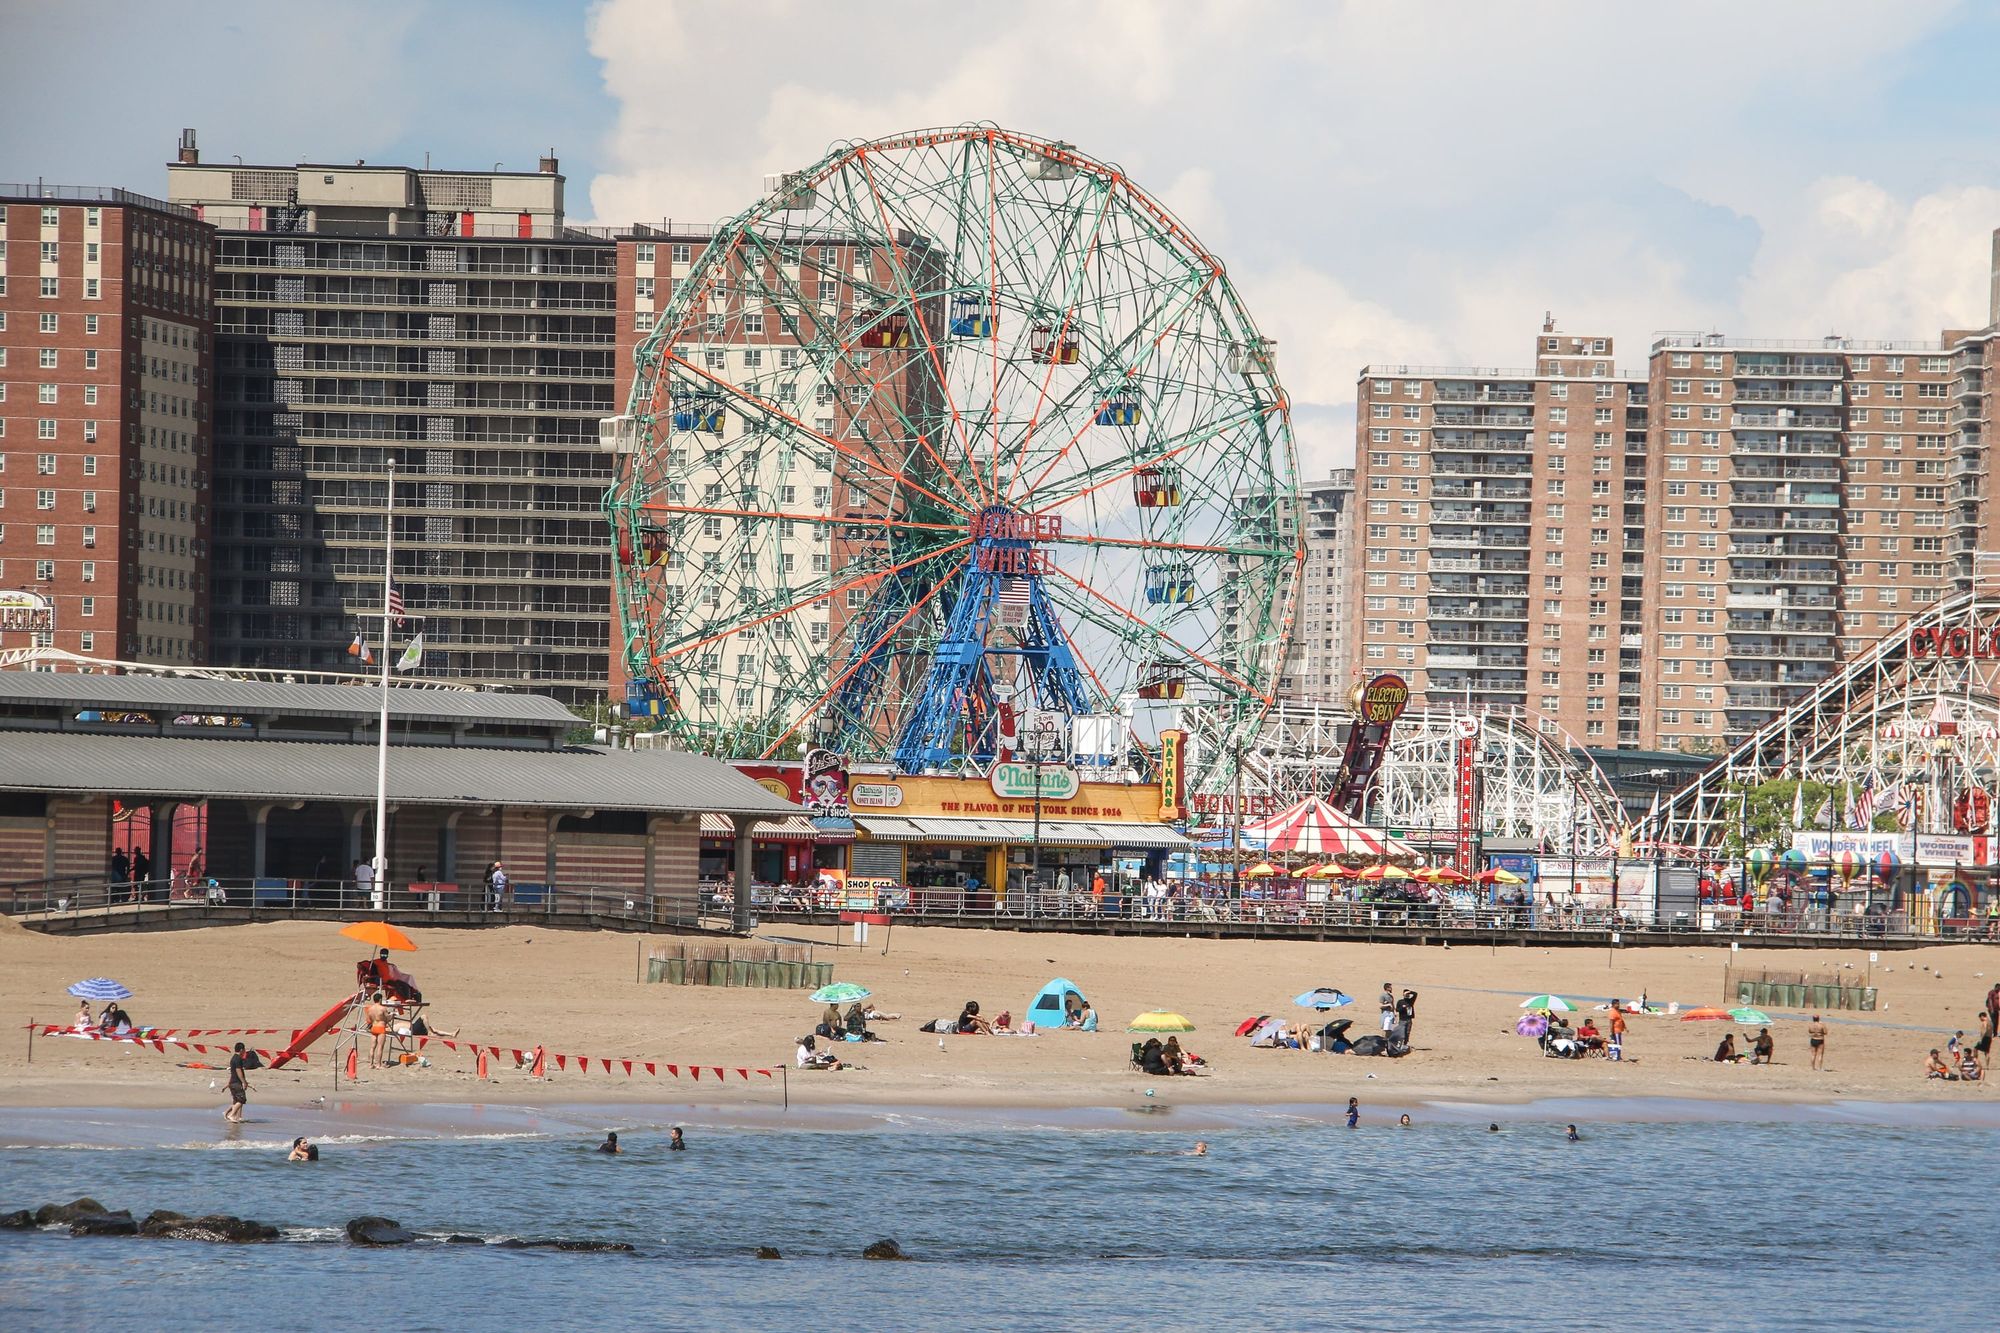 Coney Island Rides Open On Friday, New Roller Coaster and Baseball Starting Soon